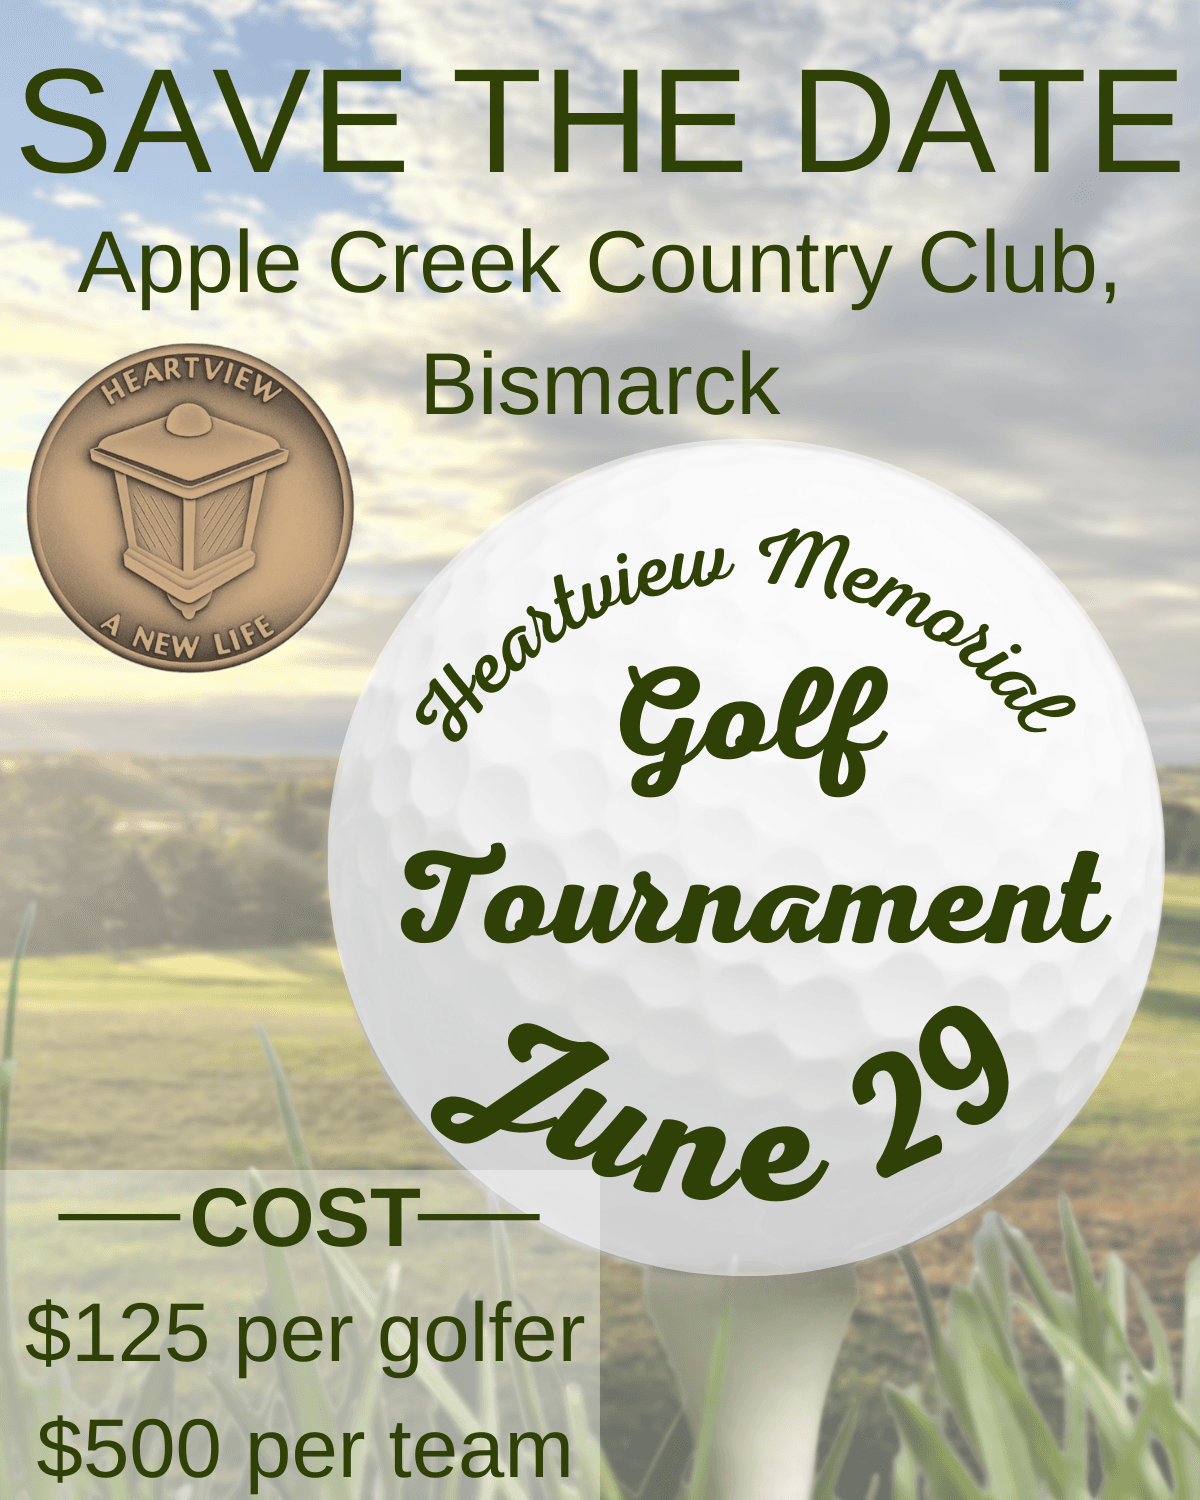 Save the Date for the Heartview Memorial Golf Tournament June 29